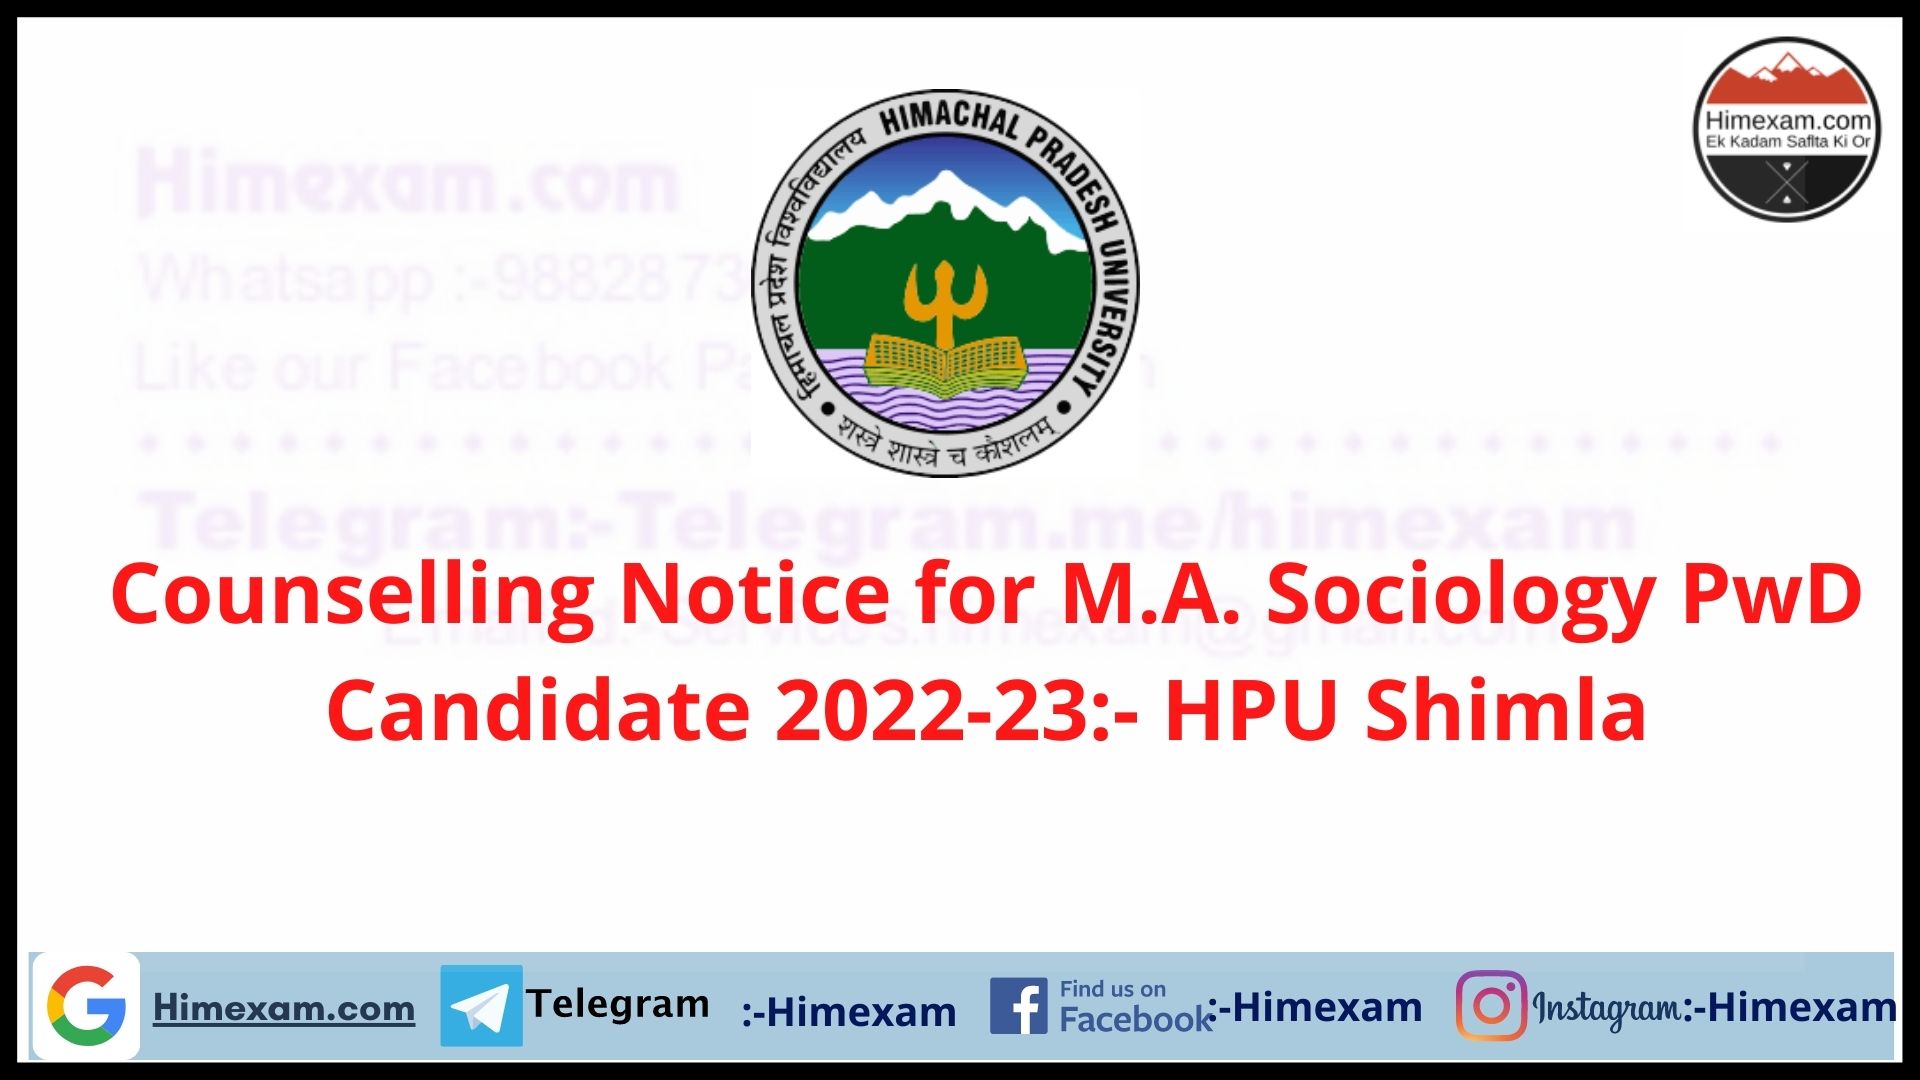 Counselling Notice for M.A. Sociology PwD Candidate 2022-23:- HPU Shimla